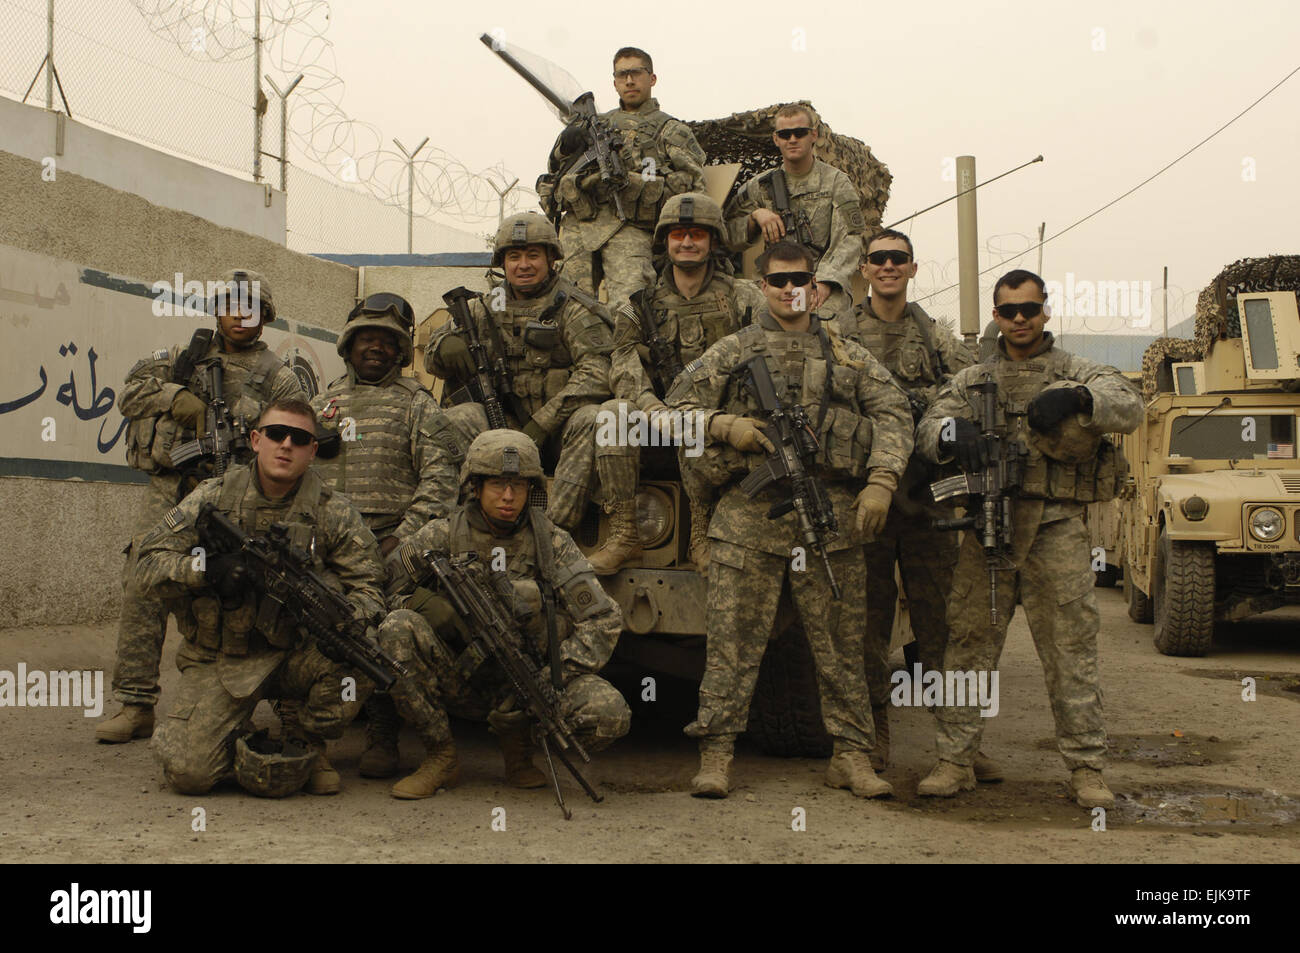 U.S. Army Soldiers assigned to weapons squad, 1st Platoon, Charlie Company, 1st Battalion, 504th Parachute Infantry Regiment pose for a photo before patrolling Rusafa, Baghdad, Iraq, Feb. 18, 2008.  Staff Sgt. Jason T. Bailey Released Stock Photo